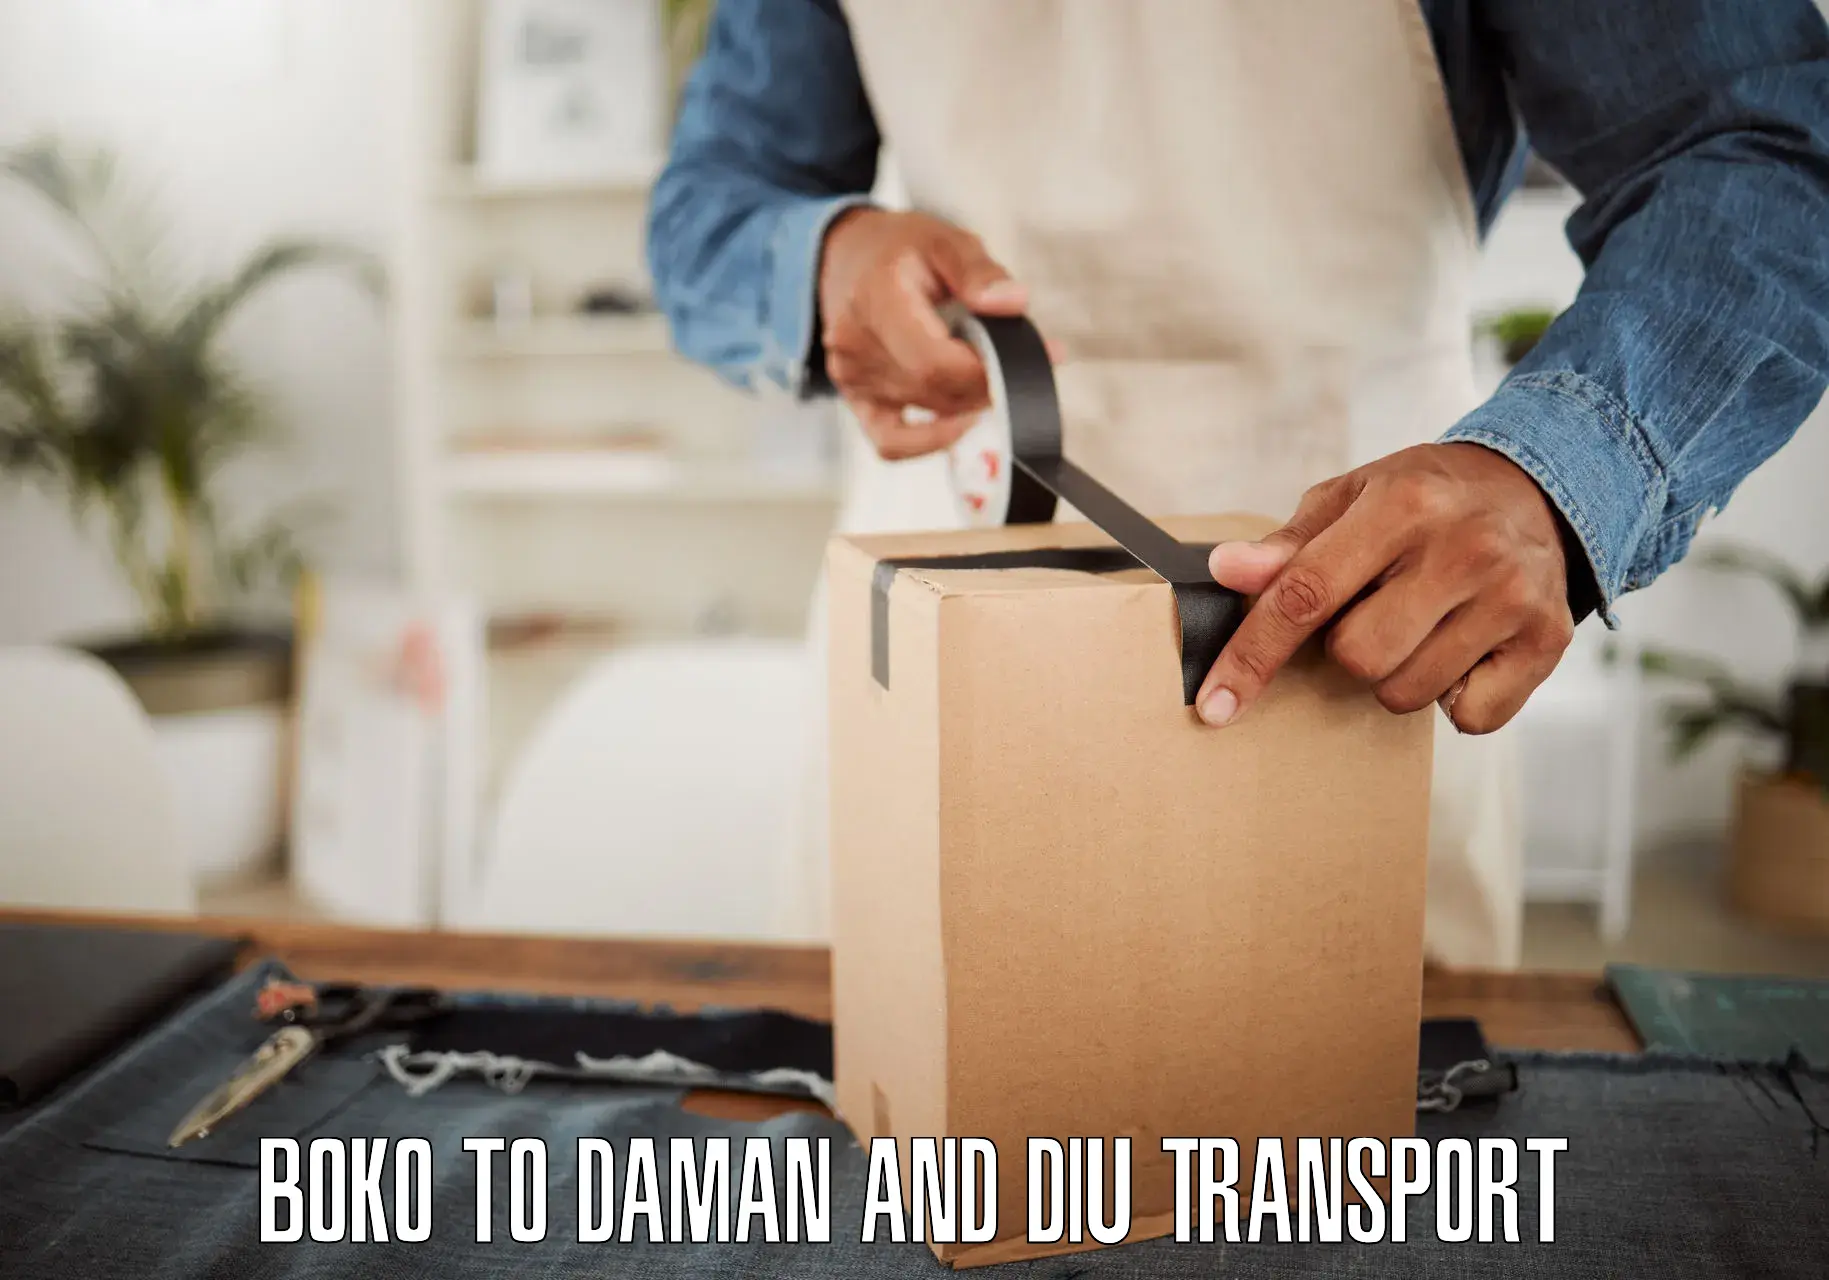 Transportation services in Boko to Daman